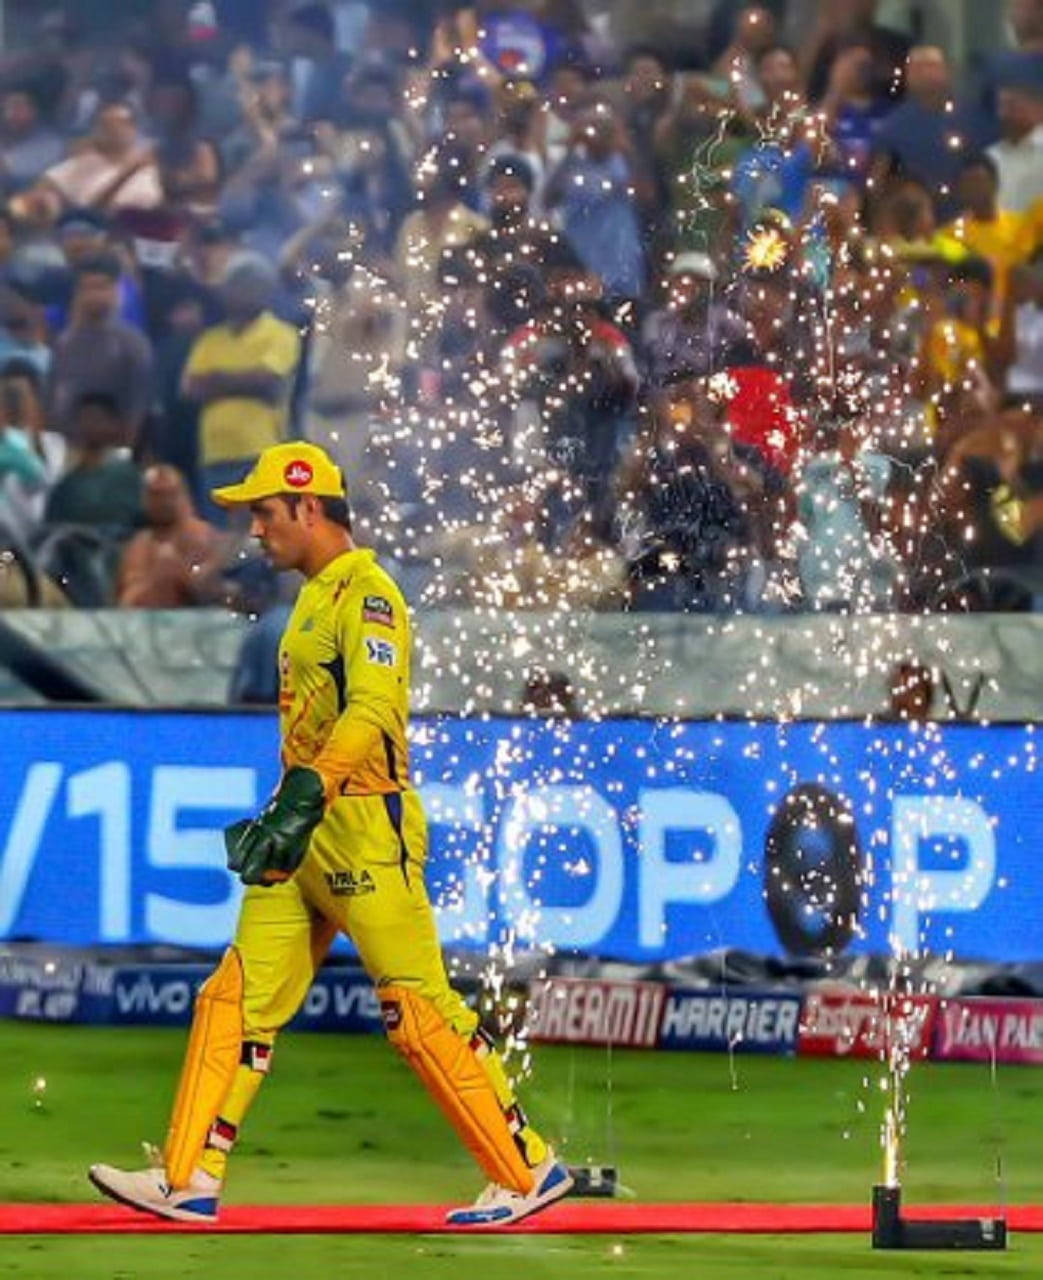 Msd Walking With Fireworks Wallpaper